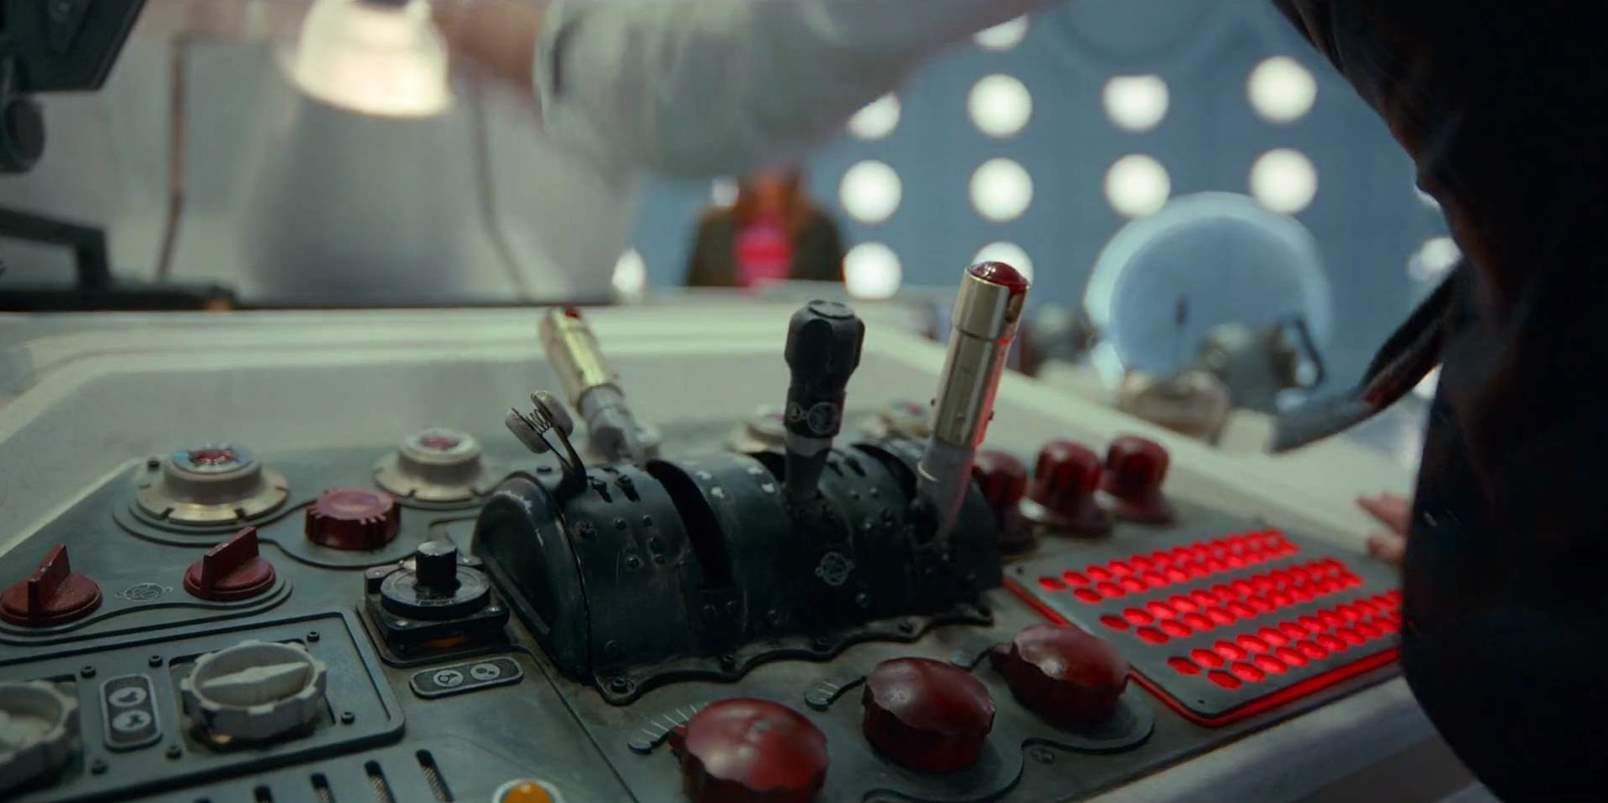 The Doctor uses the console. (TV: The Star Beast [+]Loading...["The Star Beast (TV story)"])